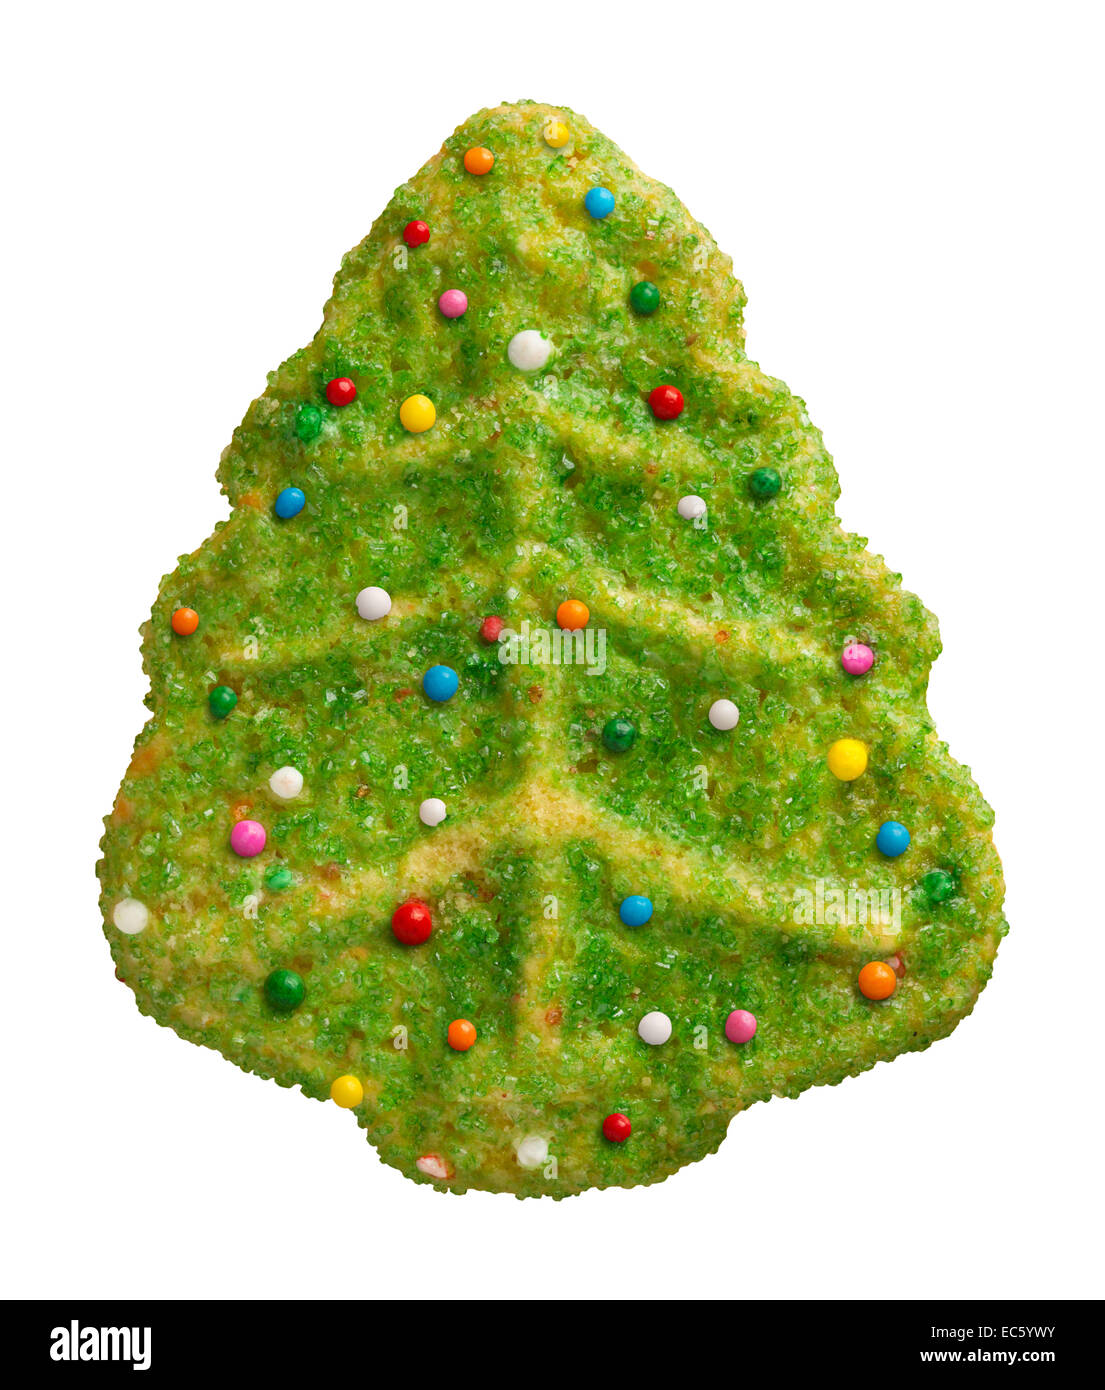 Green Christmas Tree Cookie with candy sprinkles Stock Photo